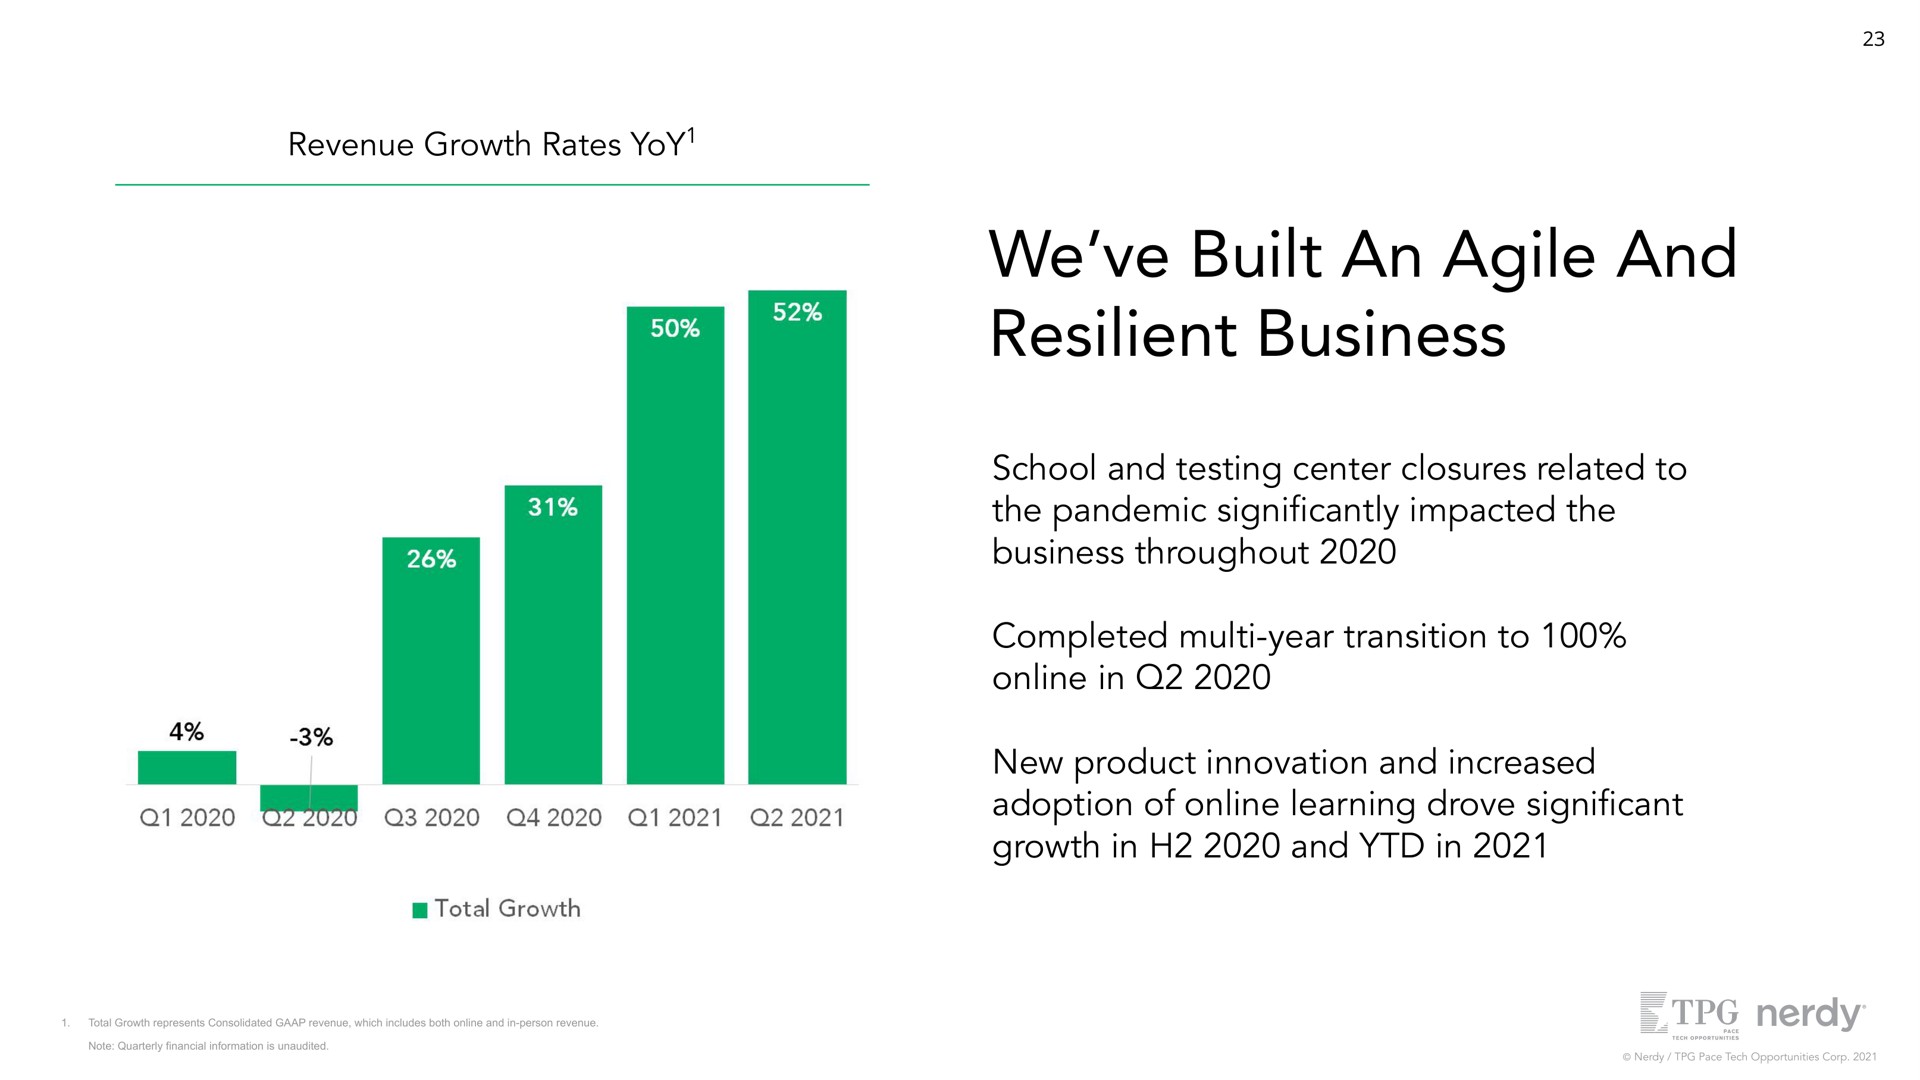 revenue growth rates yoy we built an agile and resilient business school and testing center closures related to the pandemic impacted the business throughout completed year transition to in new product innovation and increased adoption of learning drove cant growth in and in | Nerdy